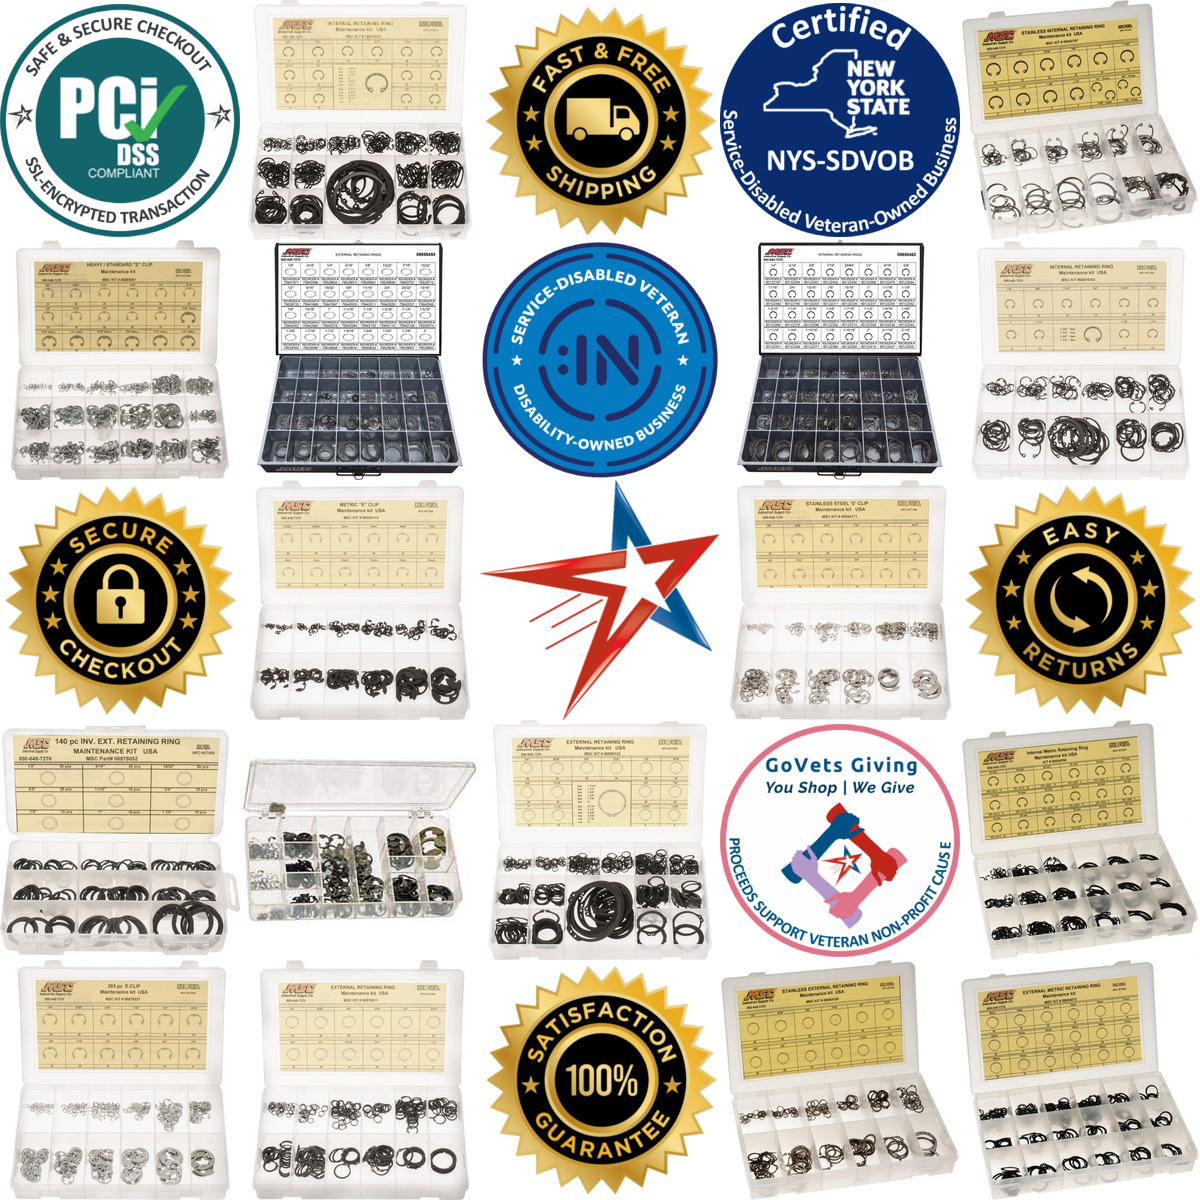 A selection of Retaining Ring Assortments products on GoVets